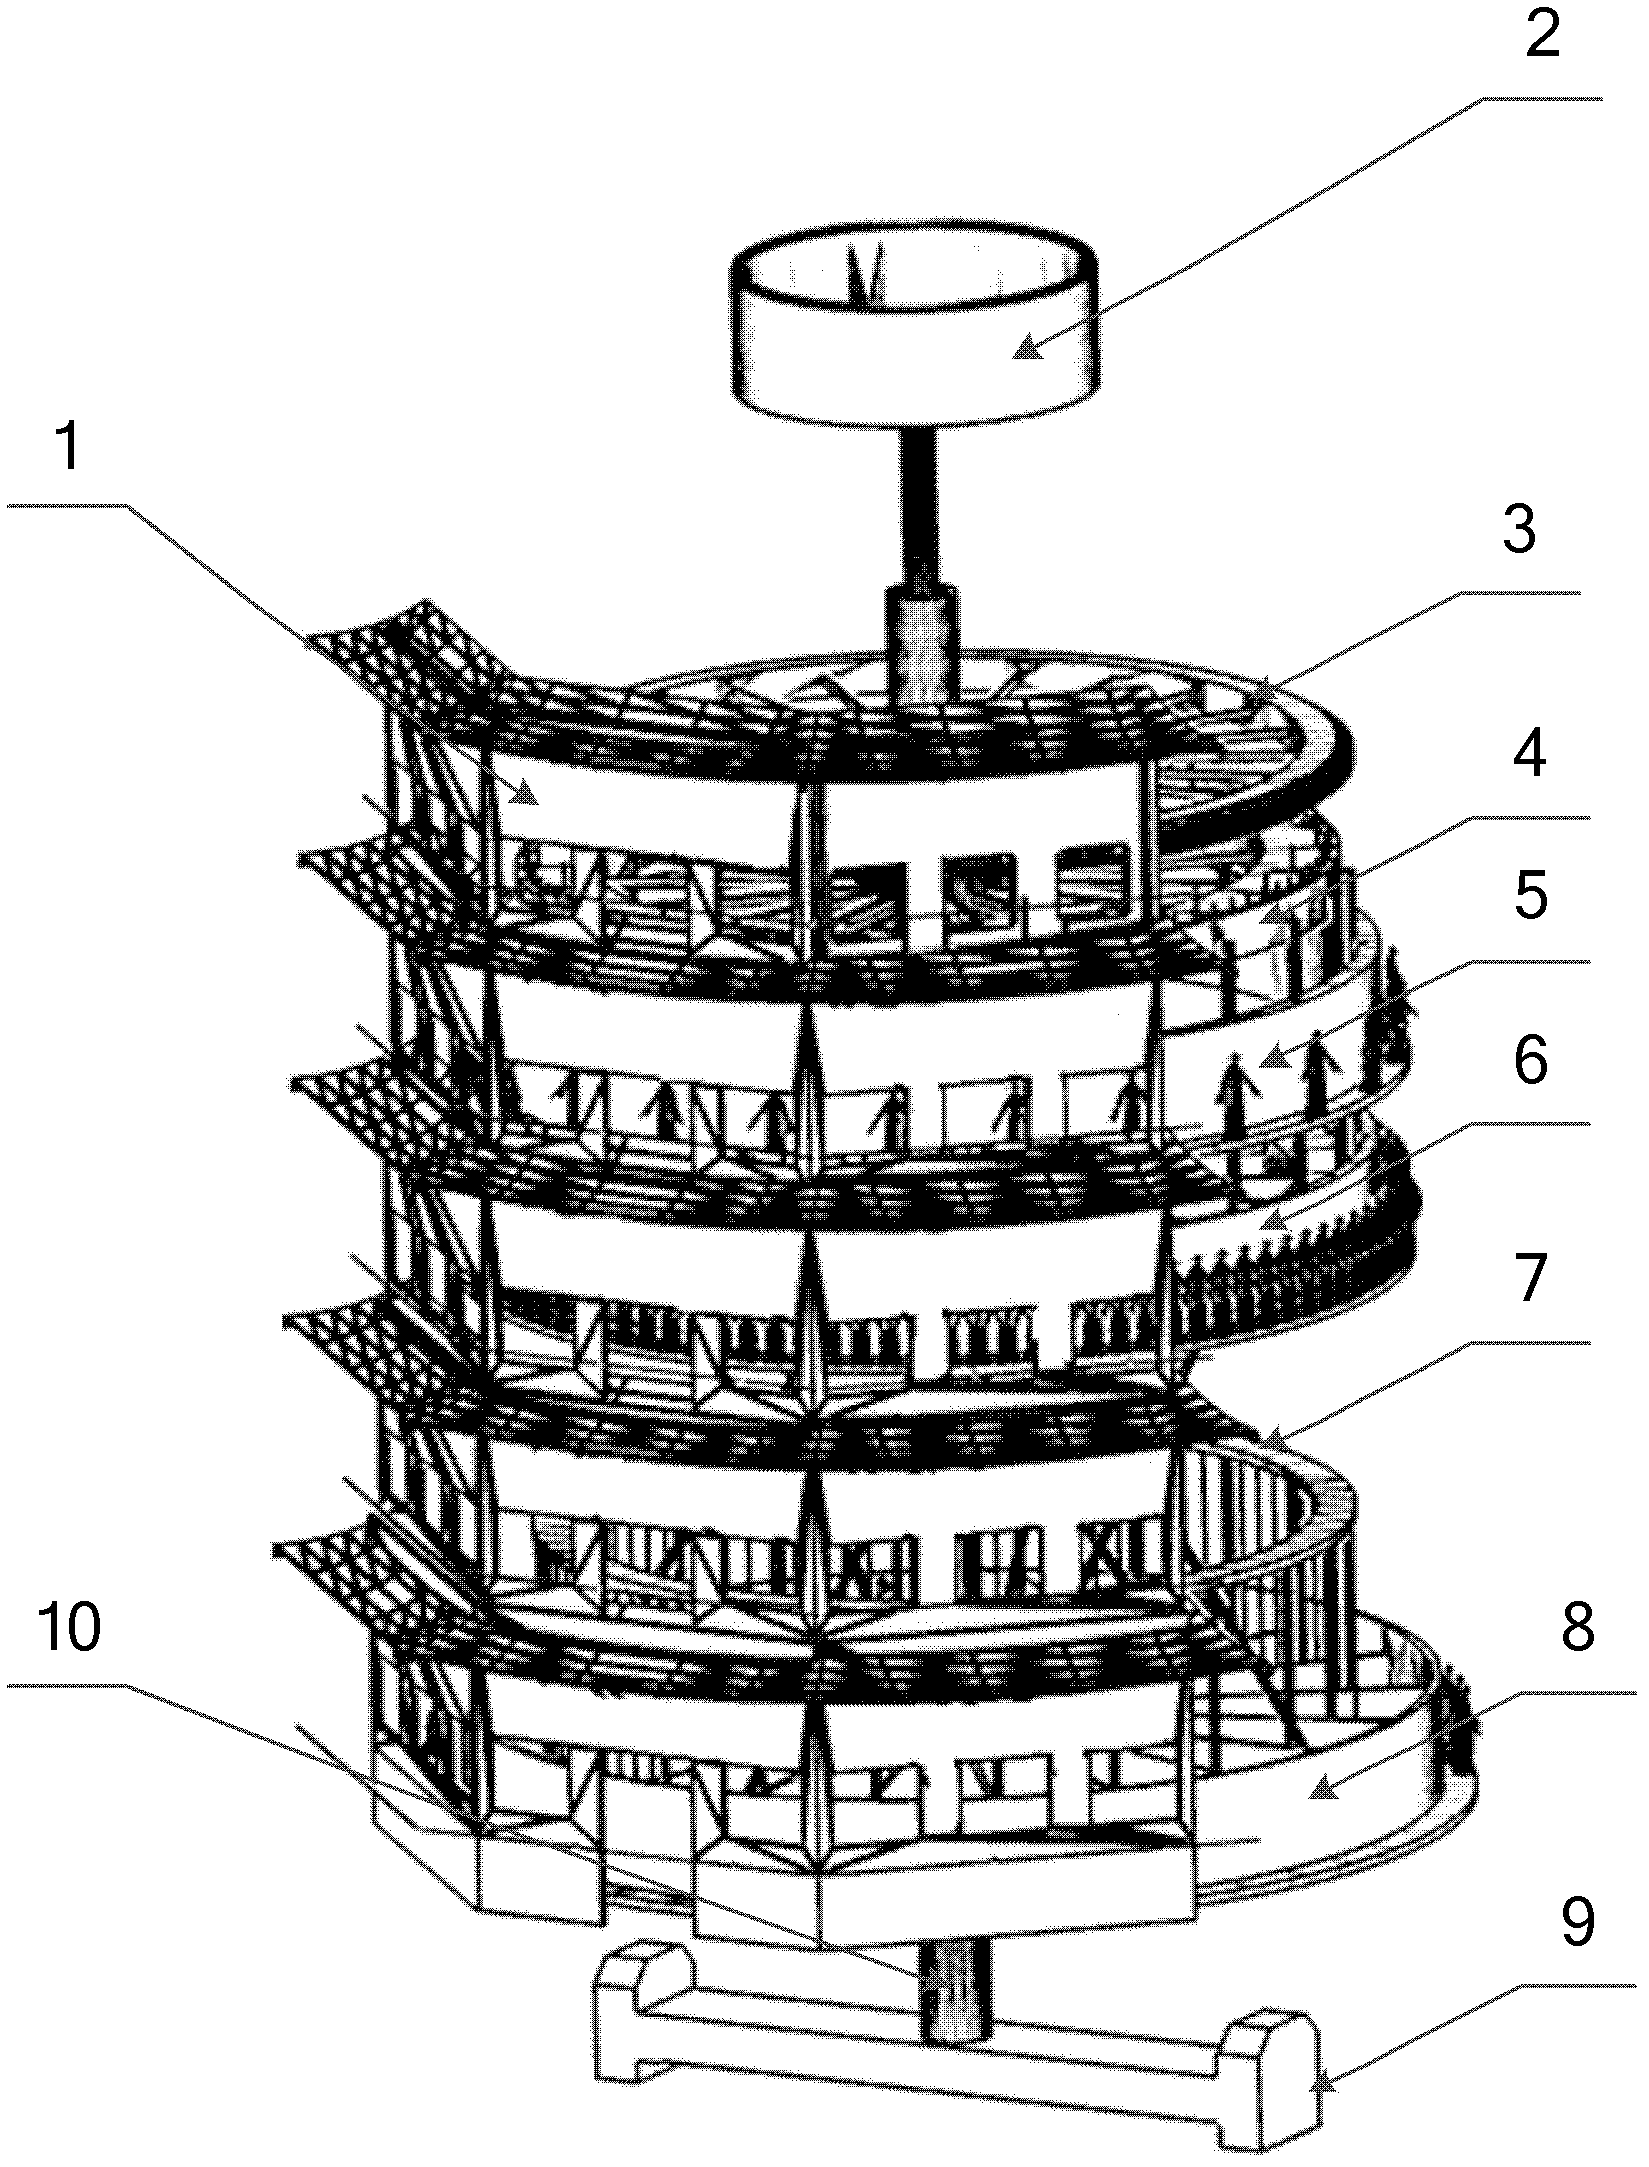 Time telling control device structure for ancient astronomical clock tower